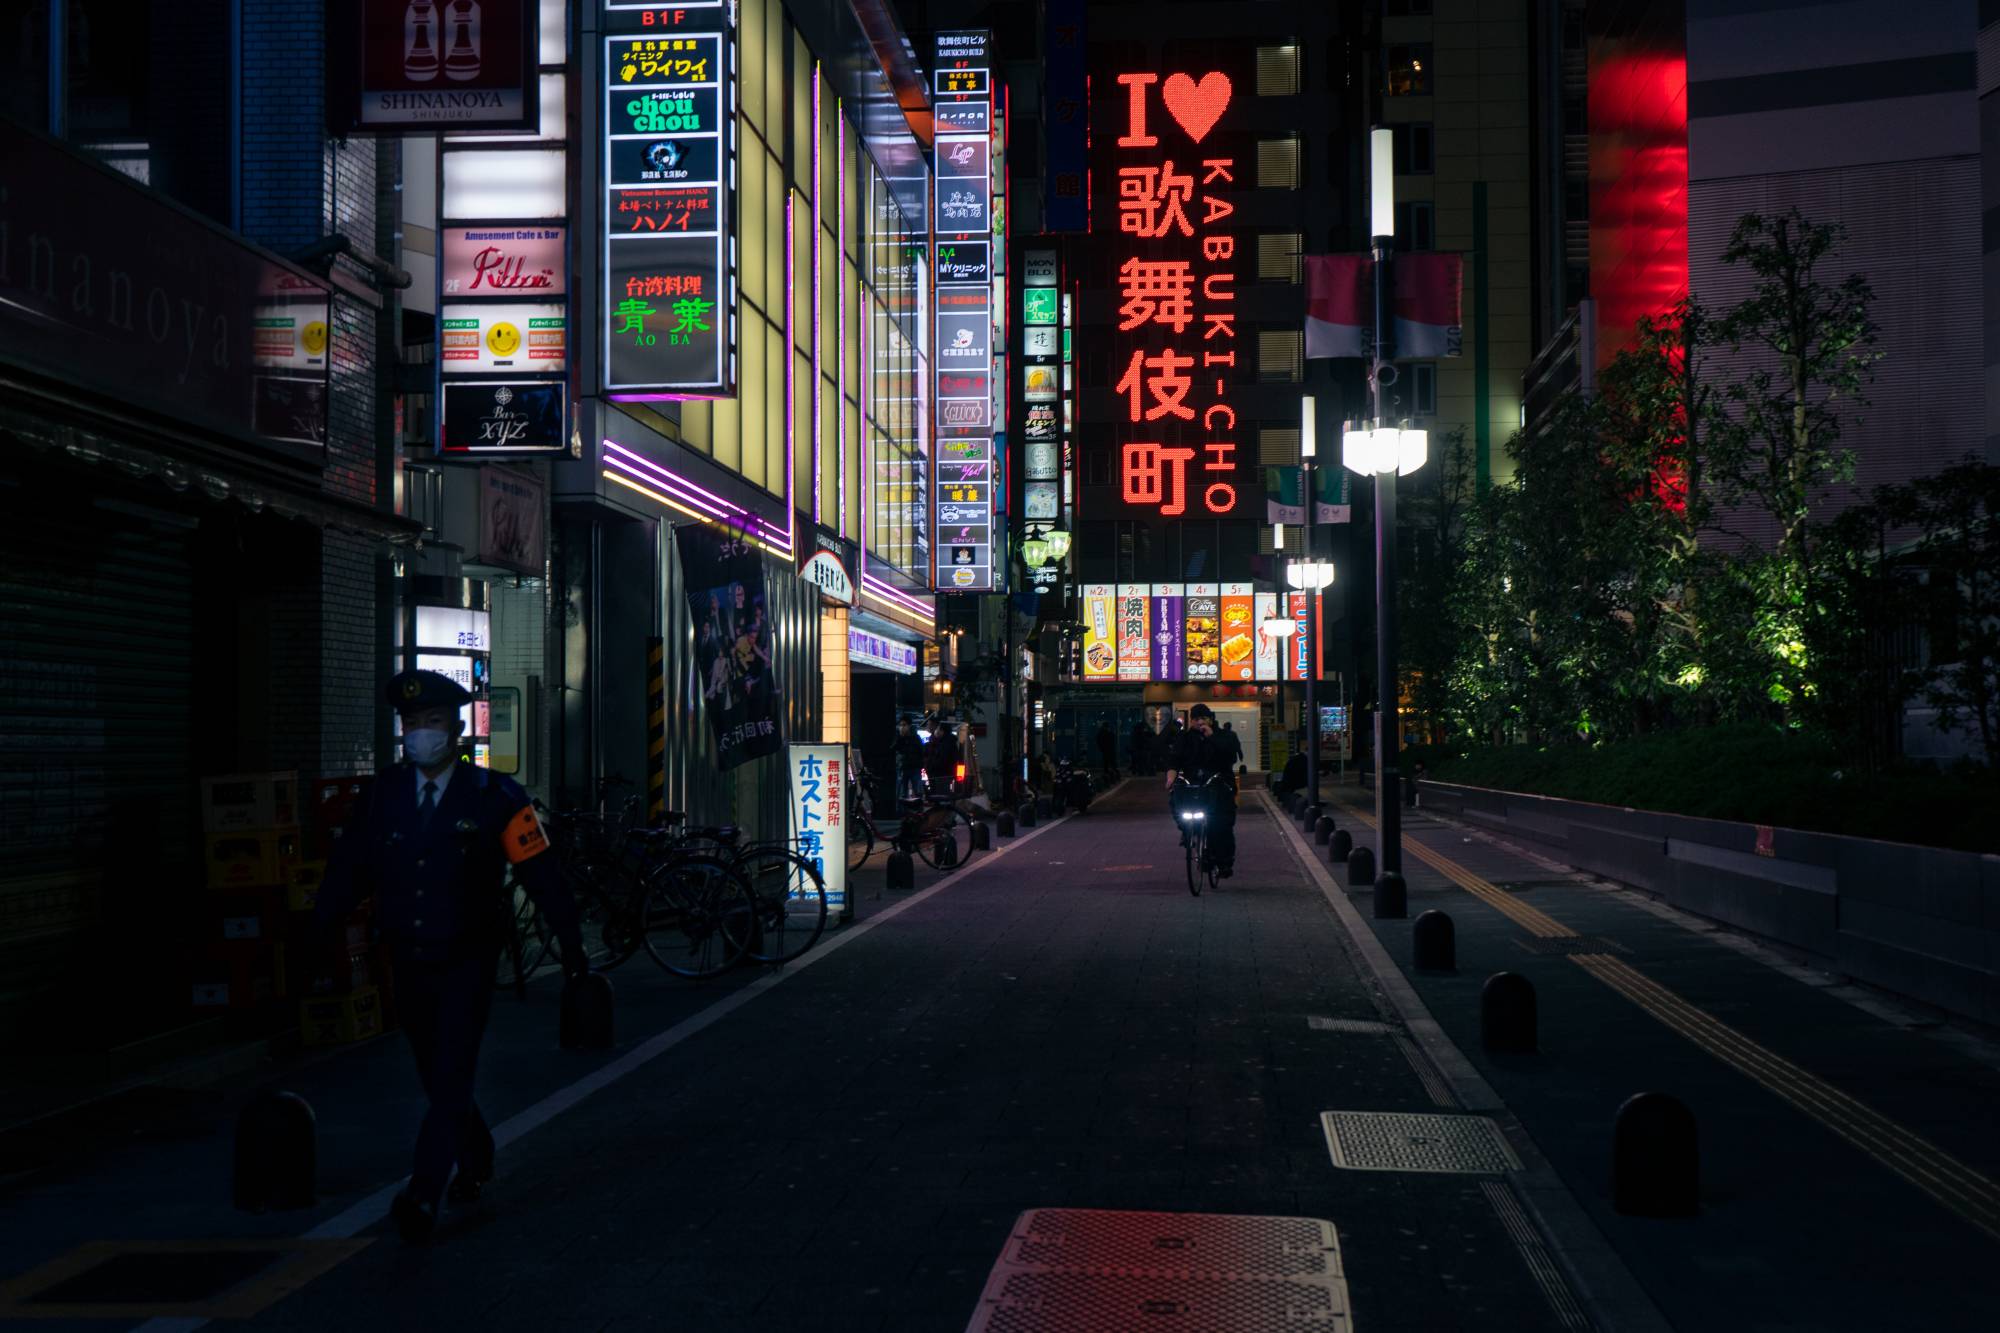 Kabukicho is a well-known red light district near Shinjuku Station, though the area still has its fair share of “wholesome” entertainment, including the Robot Restaurant (shut by the state of emergency) and the famous Toho Cinemas Godzilla statue. | Oscar Boyd